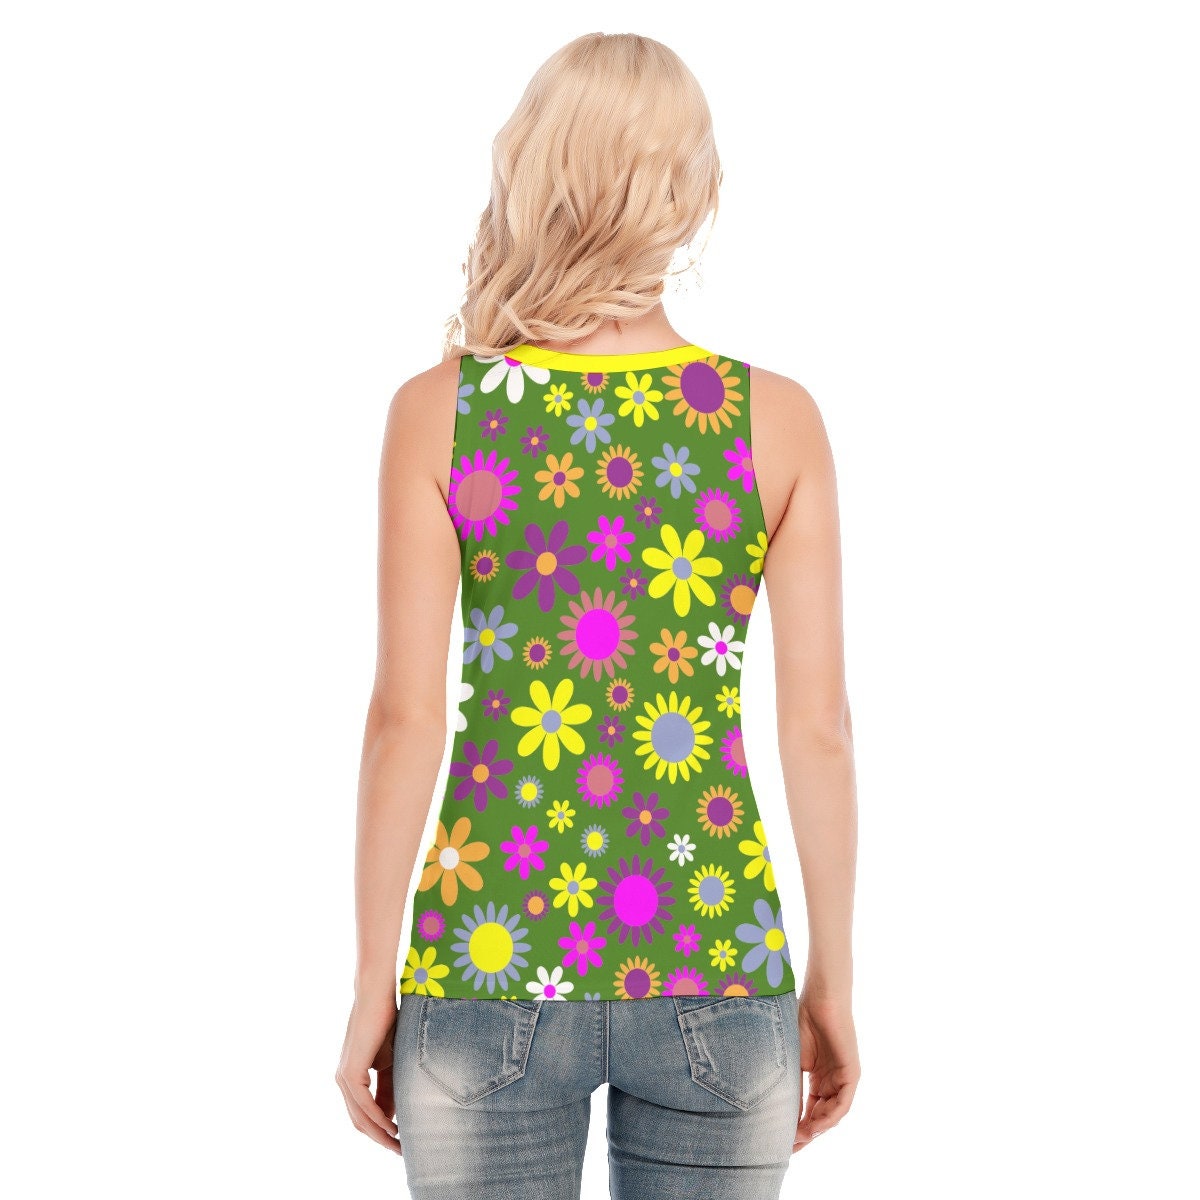 Retro Tank Tops, Mod Tops , 60s Style Tops, Olive Green Tank Top, Floral Tank Top, Womens Tank Tops,Retro Tops, Sleeveless Top,70s Style Top